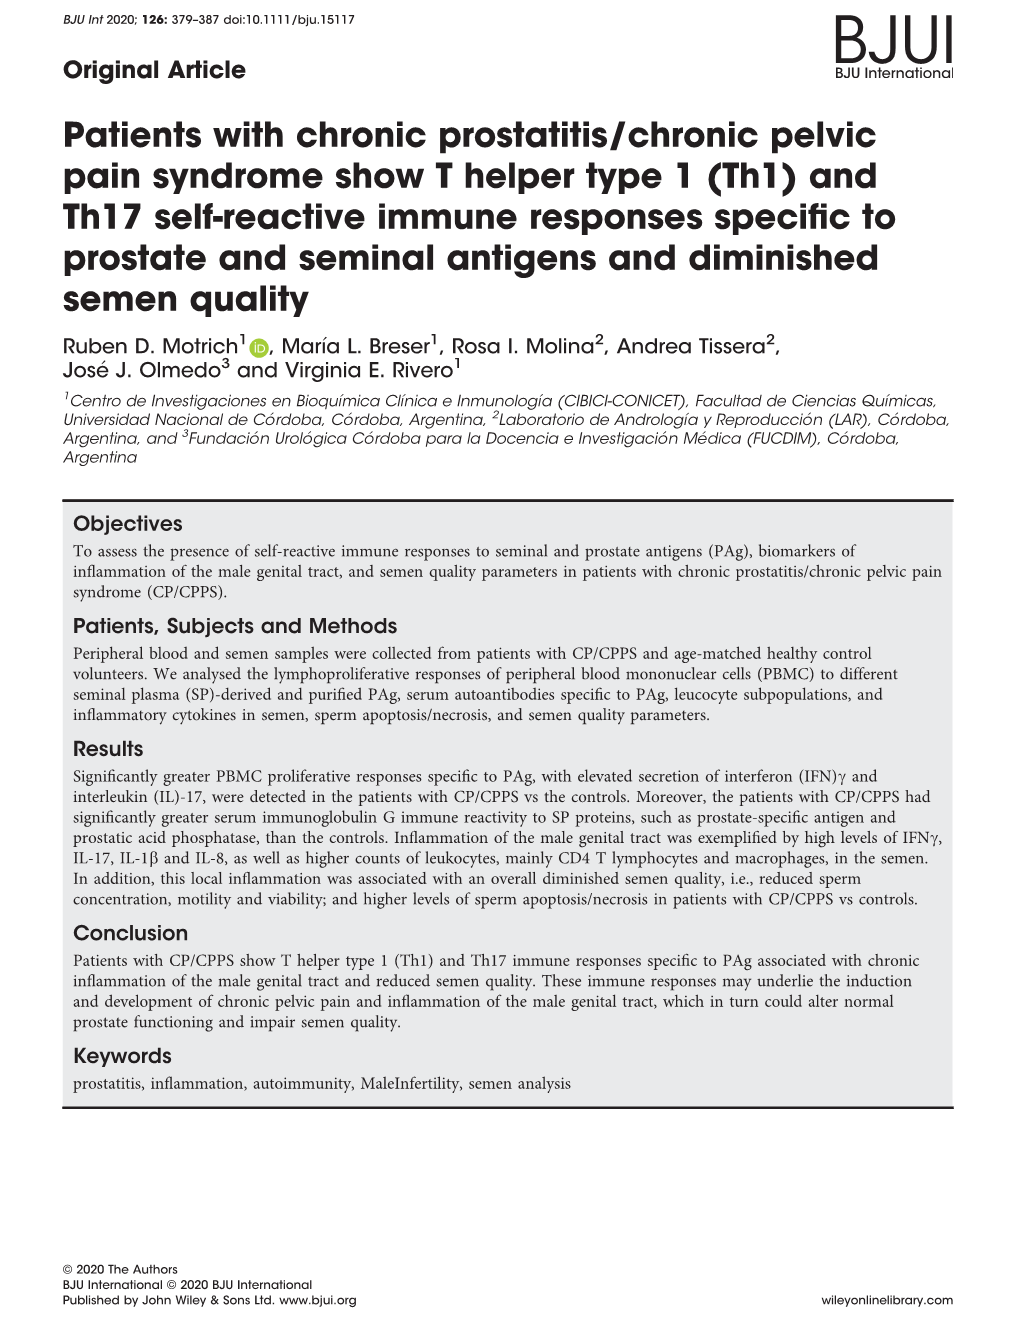 (Th1) and Th17 Self‐Reactive Immune Respon